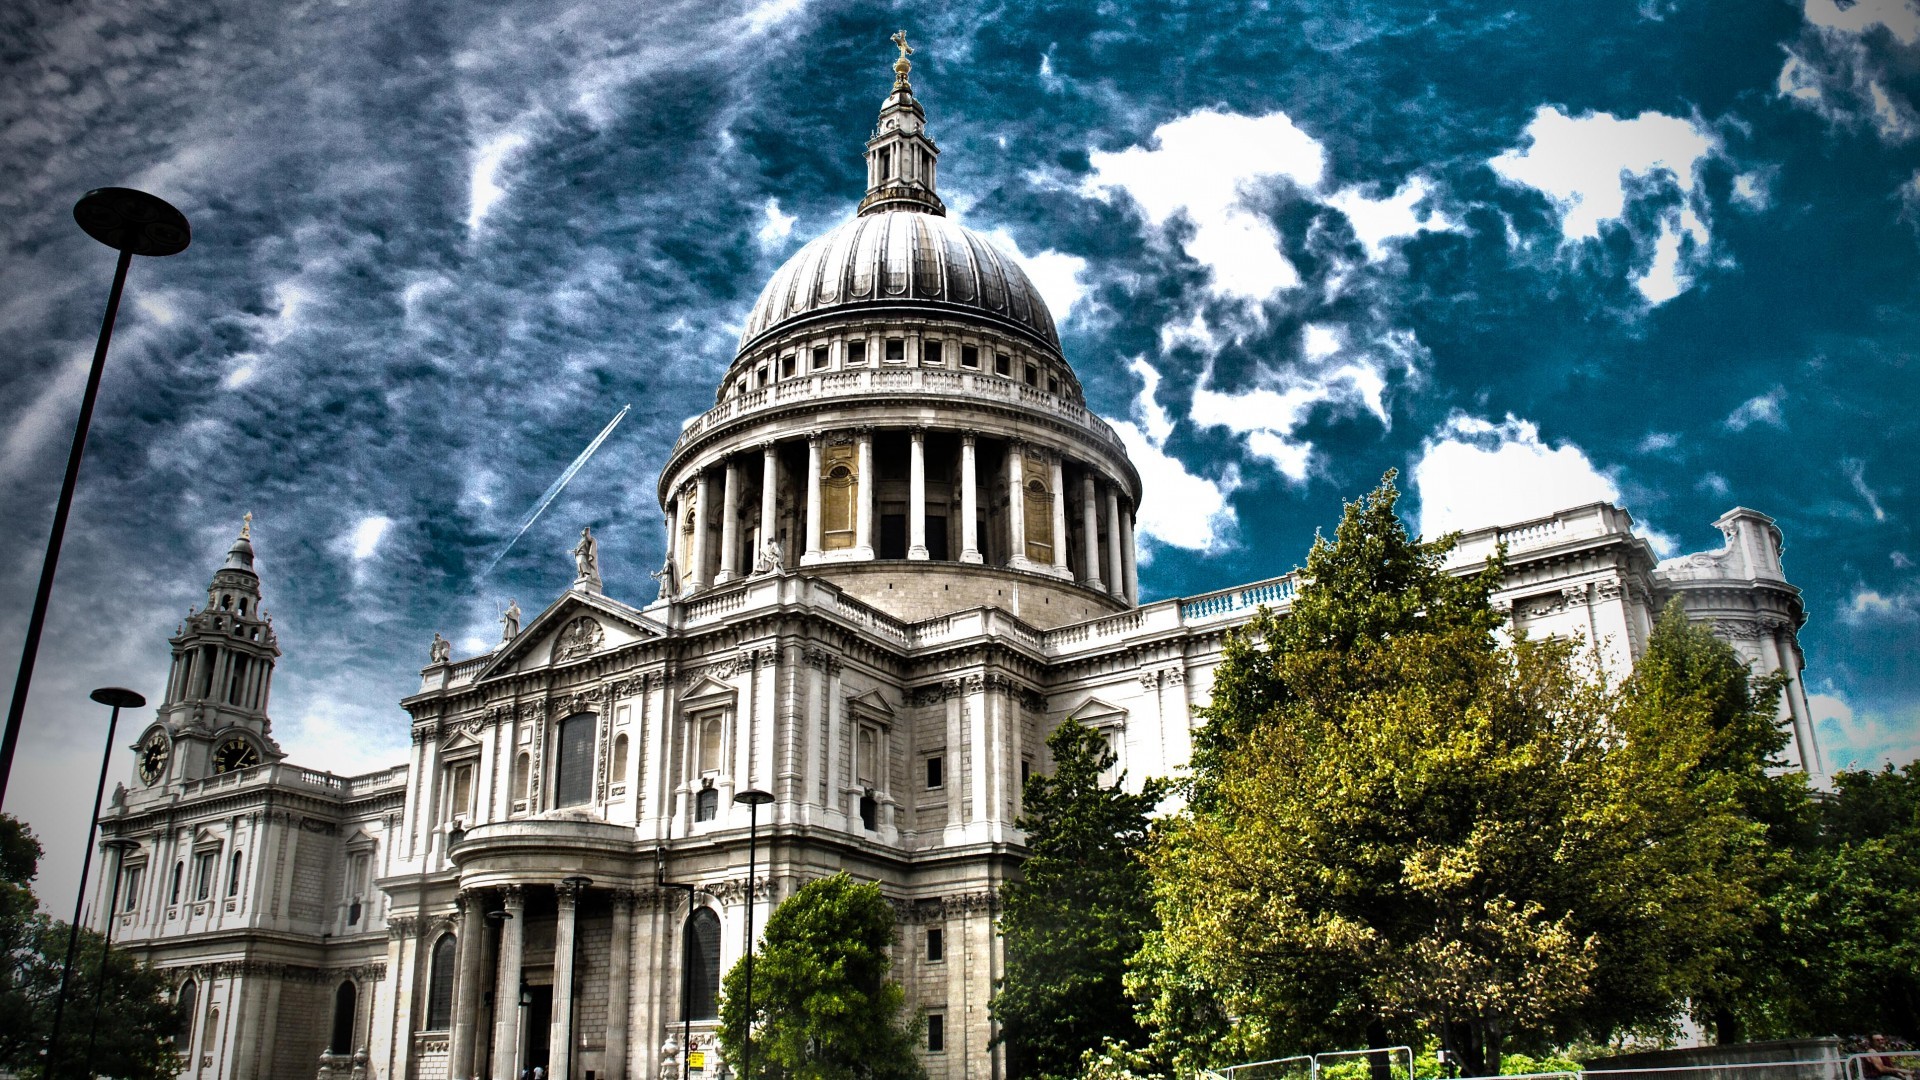 1920x1080 St Paul's Cathedral Fantasy Wallpaper